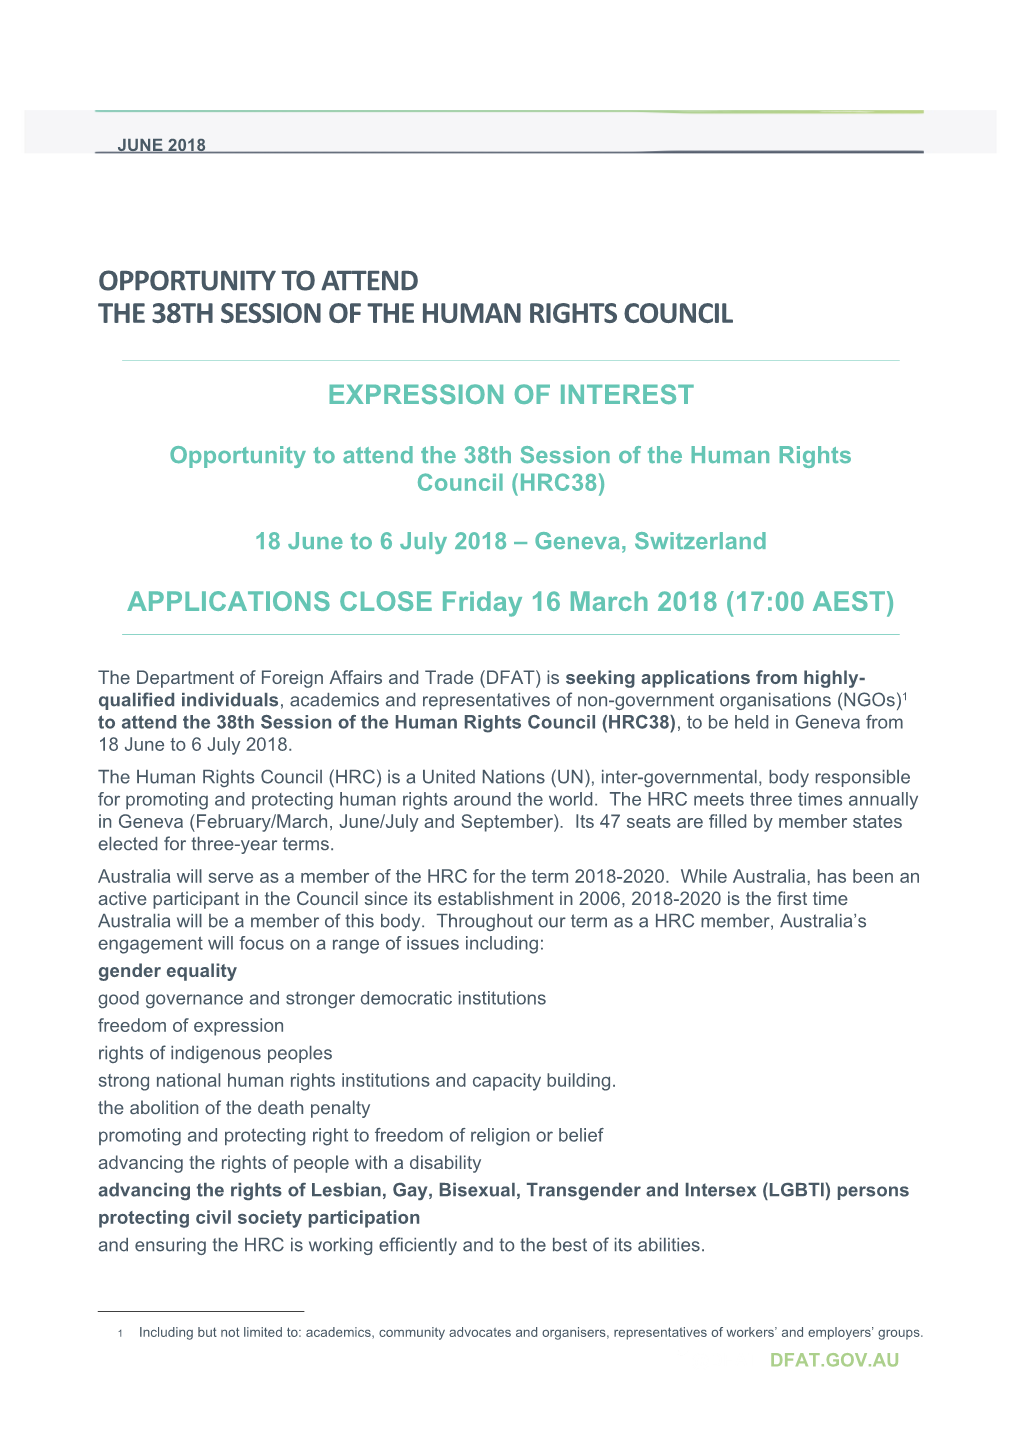 Opportunity to Attend the 38Th Session of the Human Rights Council (HRC38), June-July 2018